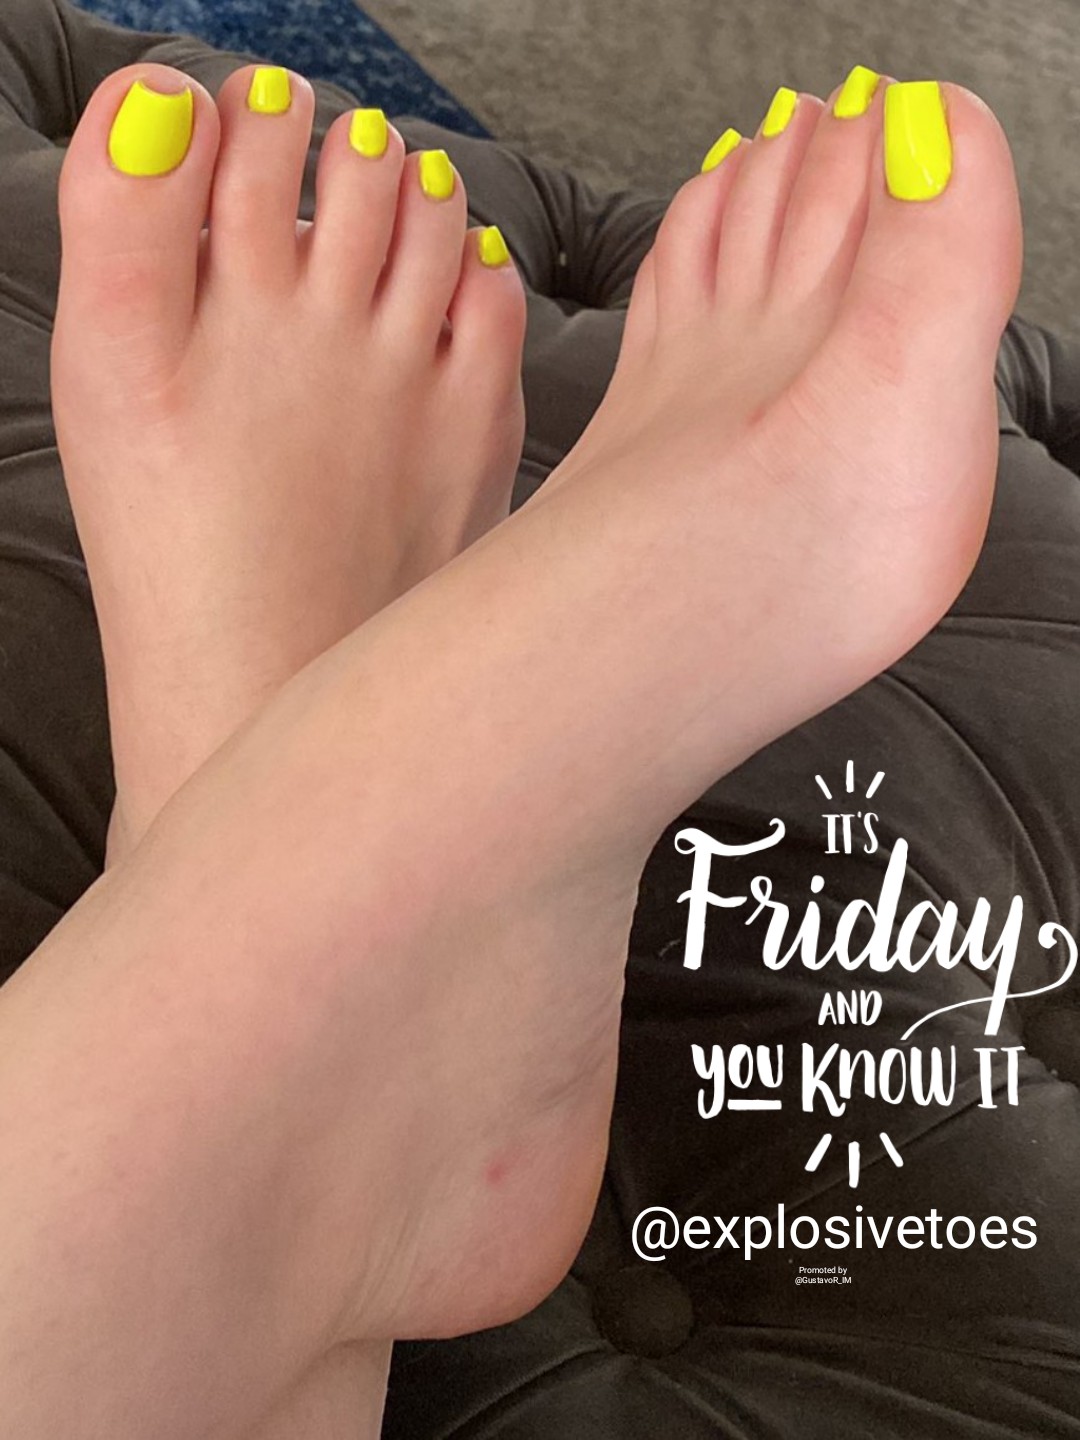 Gustavo on X: @explosivetoes So attractives yellow #toenails and a lovely  #sexy #toes 💗💝👍💯💦💦💦 t.cohpf9M1OK80  X